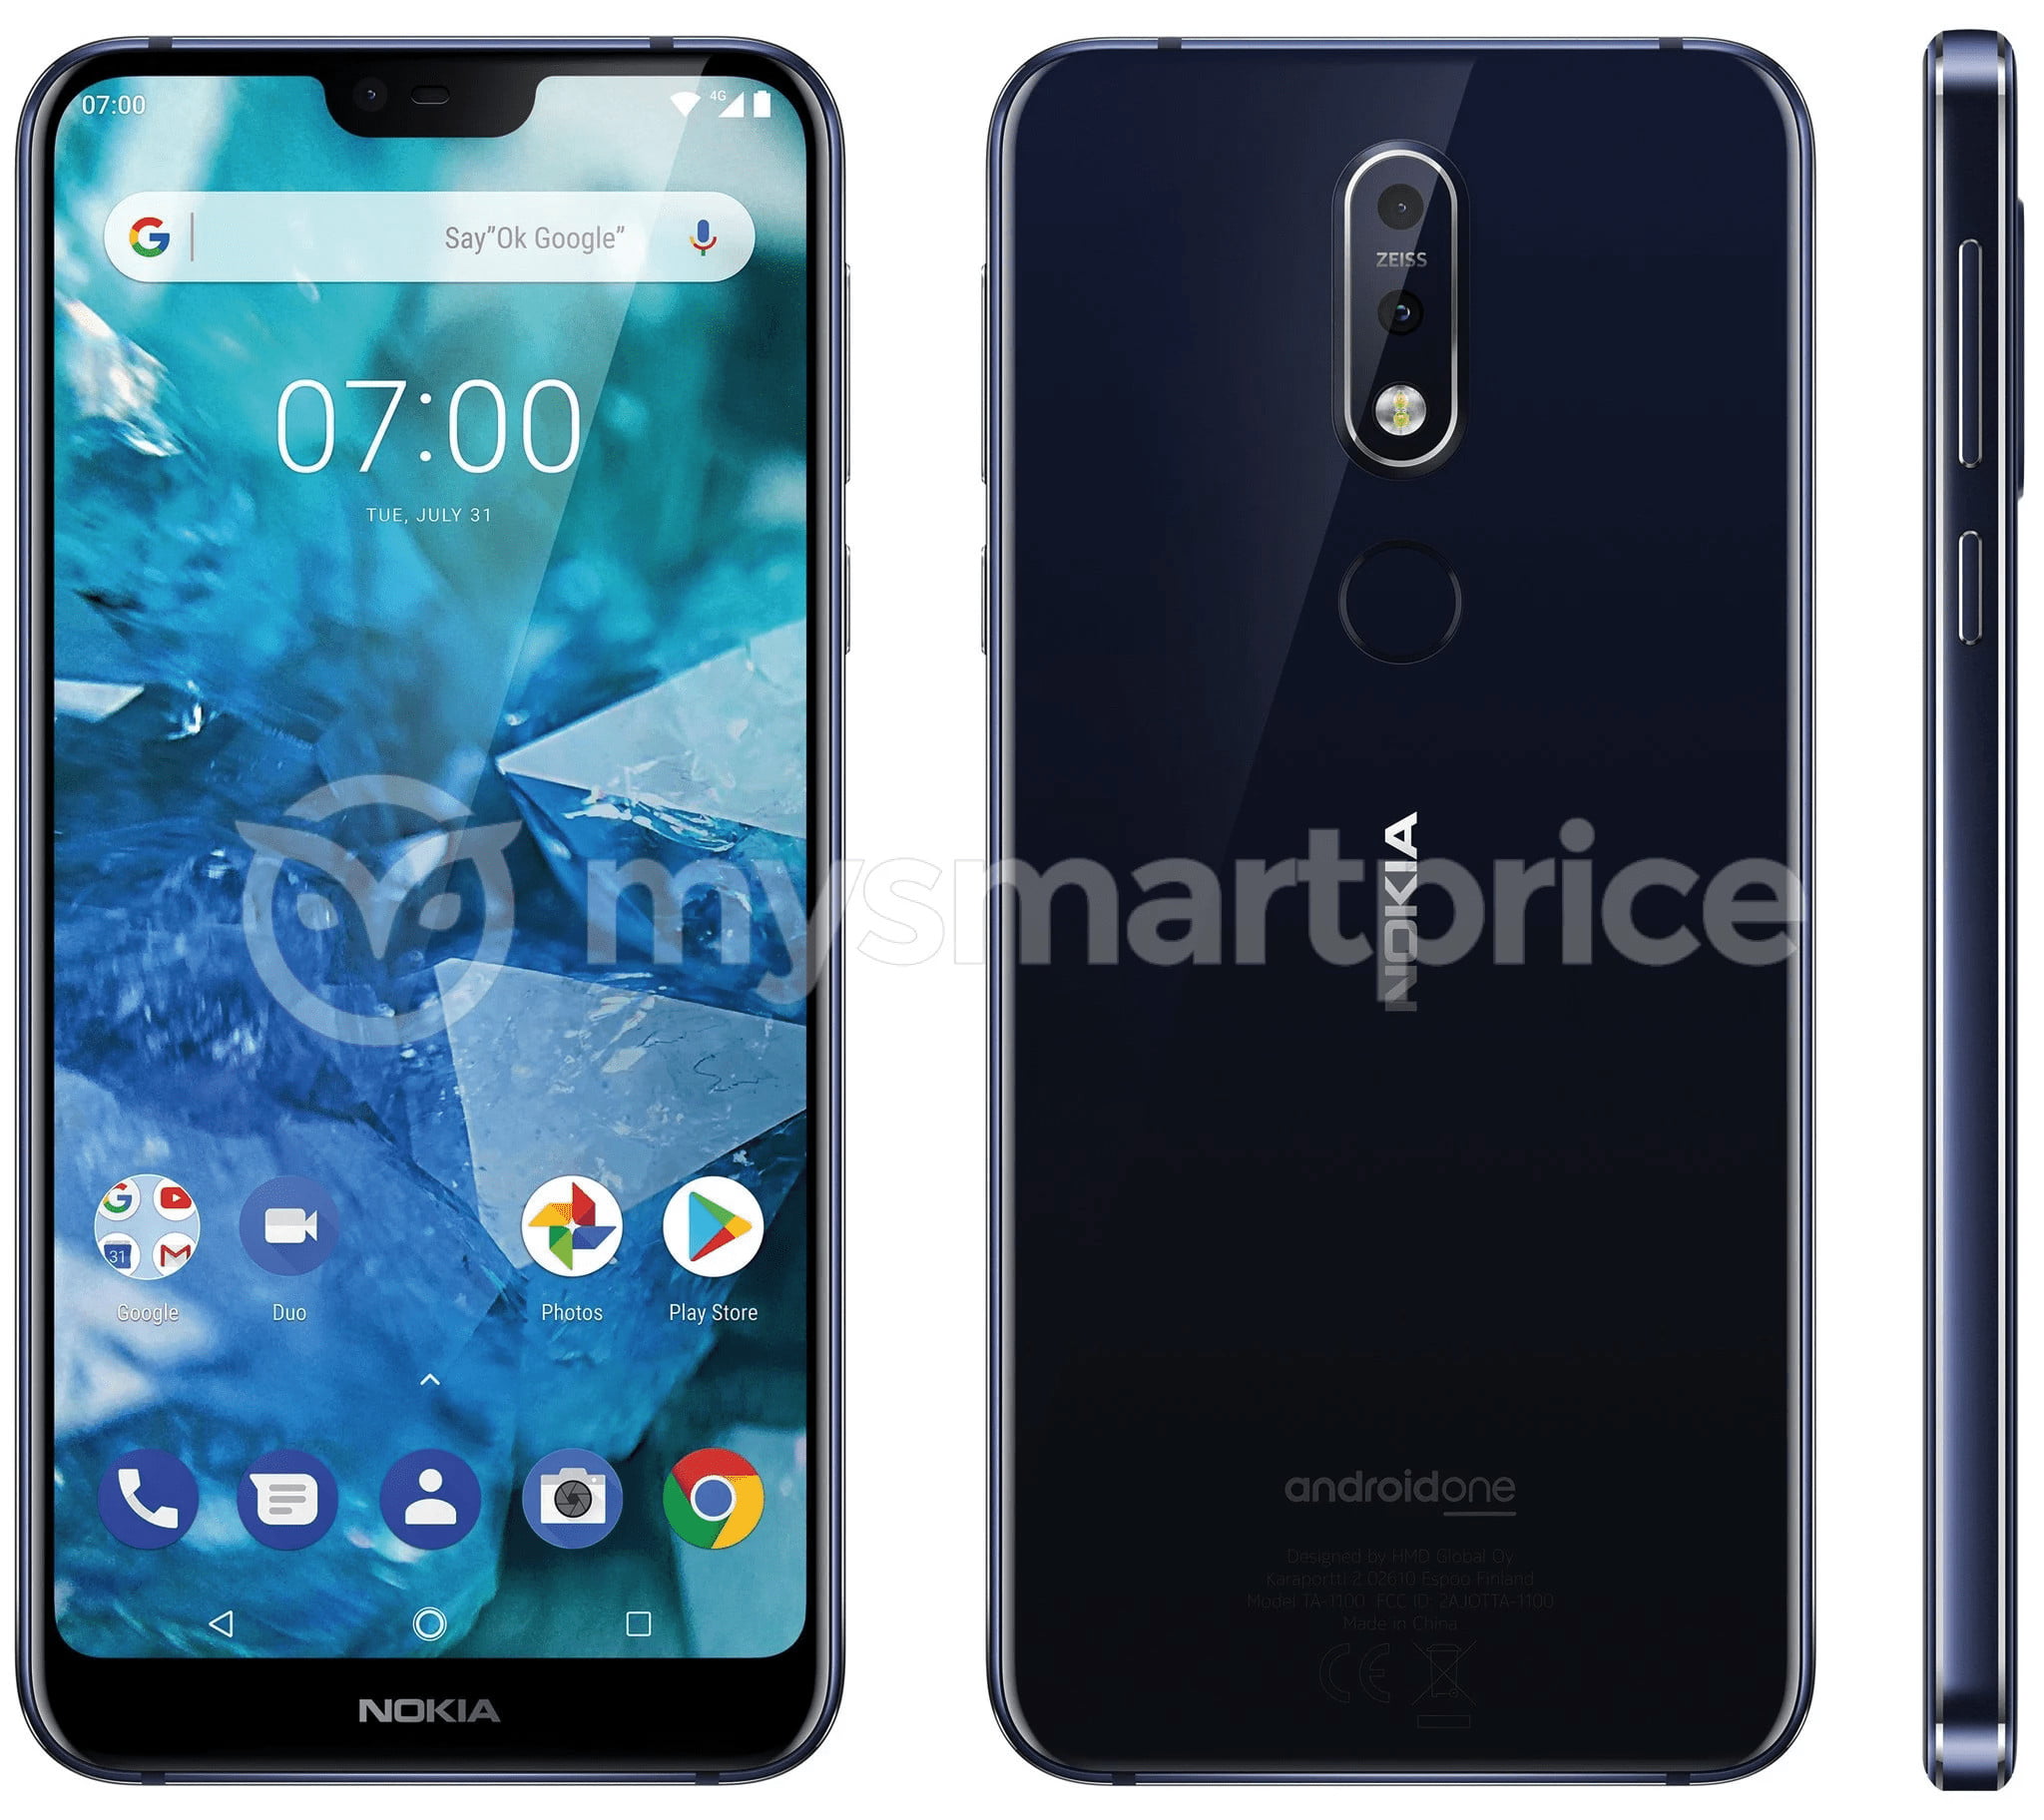 Nokia 7.1 Plus press image that leaked recently